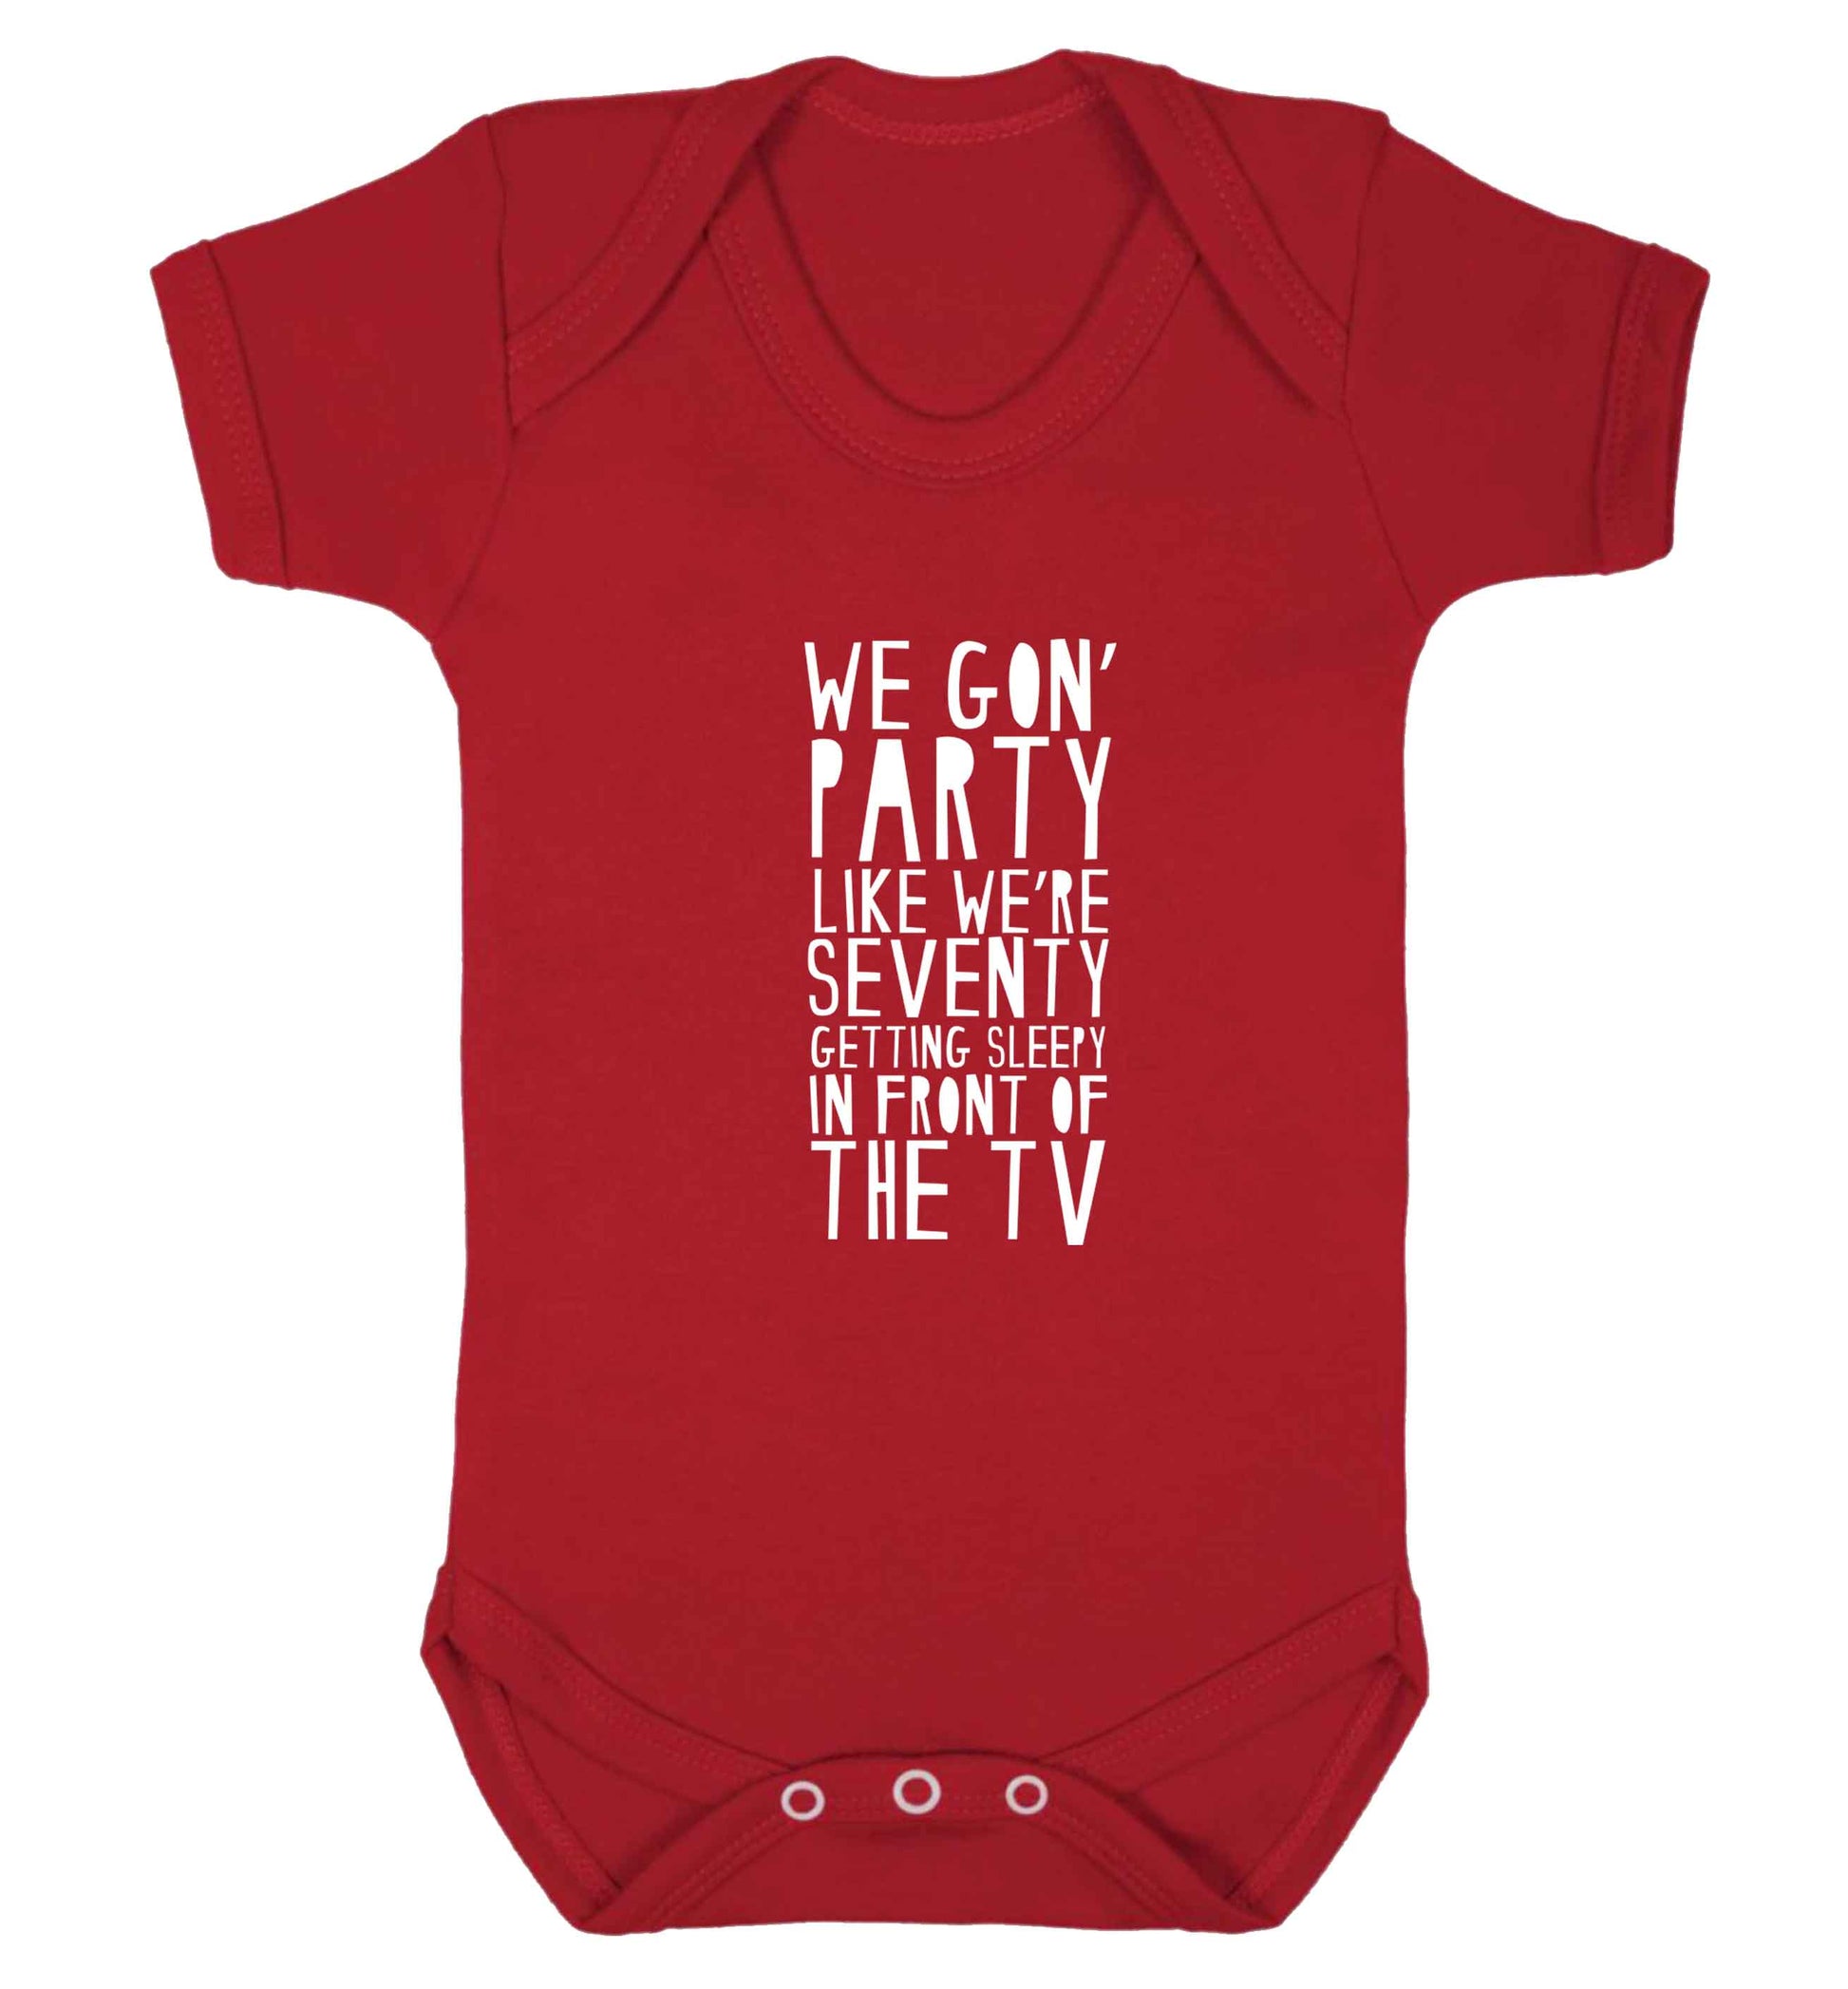 We gon' party like we're seventy getting sleepy in front of the TV baby vest red 18-24 months